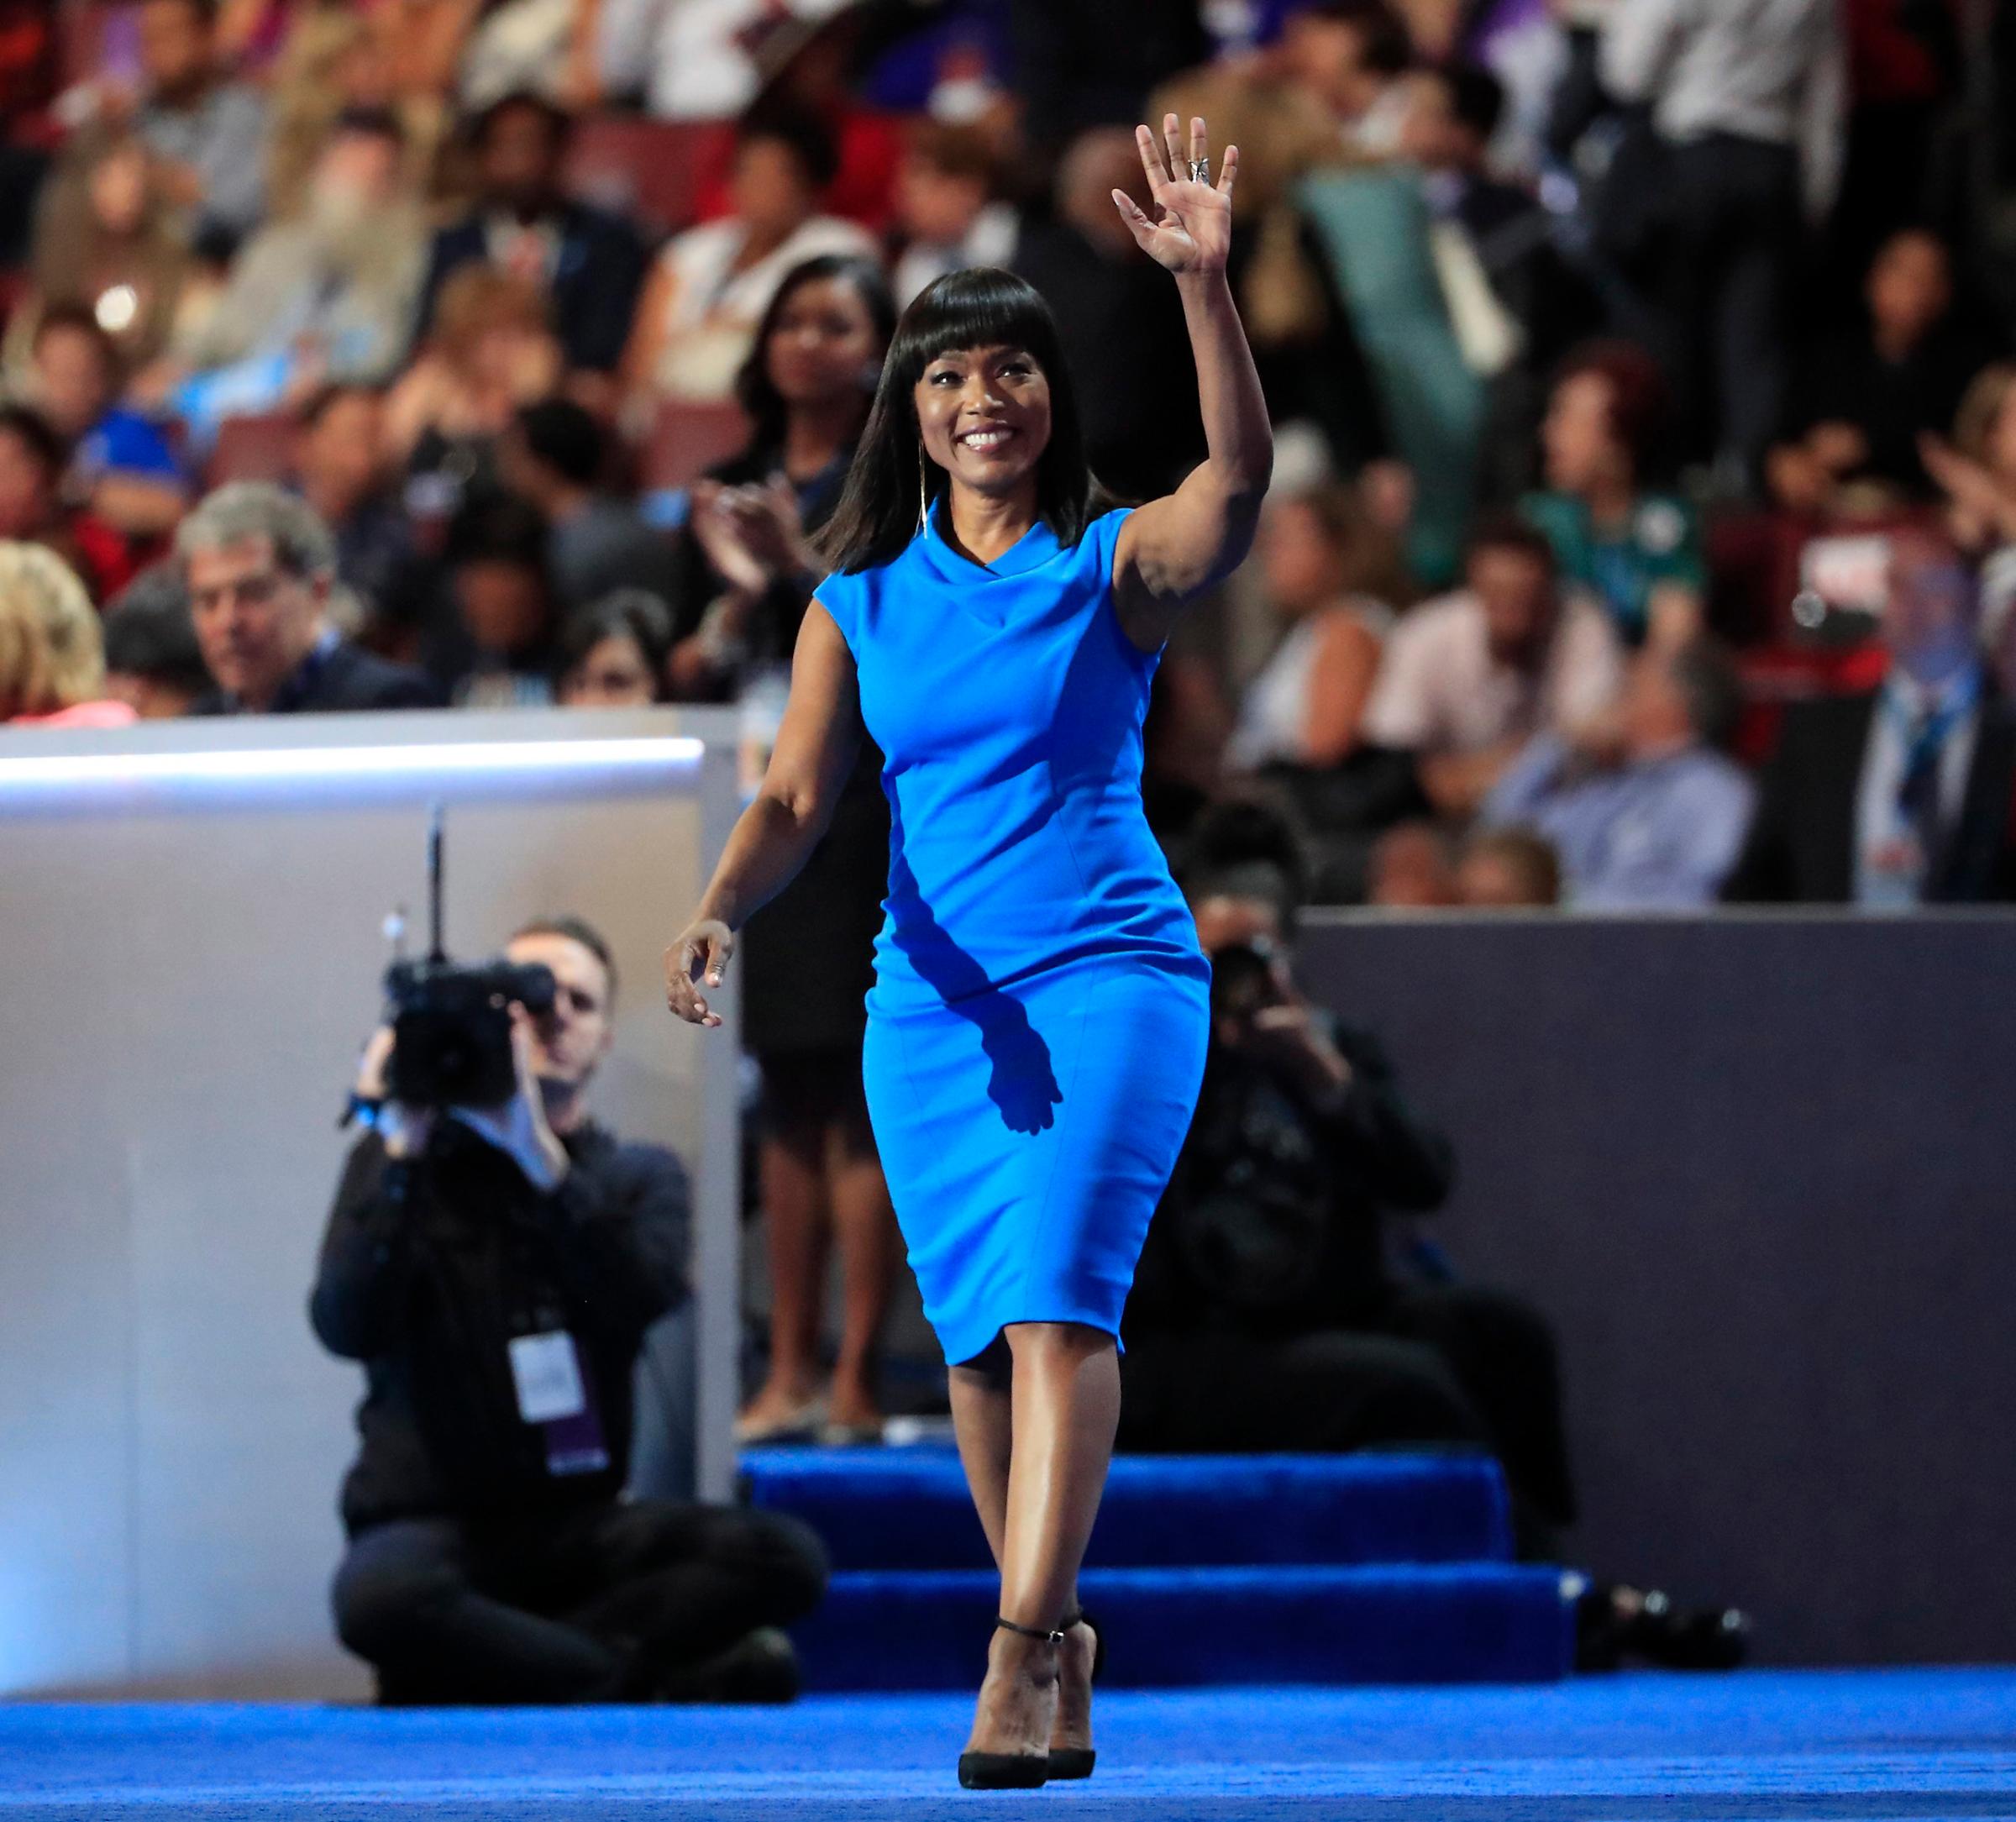 Angela Bassett walks to the stage prior to speaking on the third day of the Democratic National Convention at the Wells Fargo Center in Philadelphia on July 27, 2016.